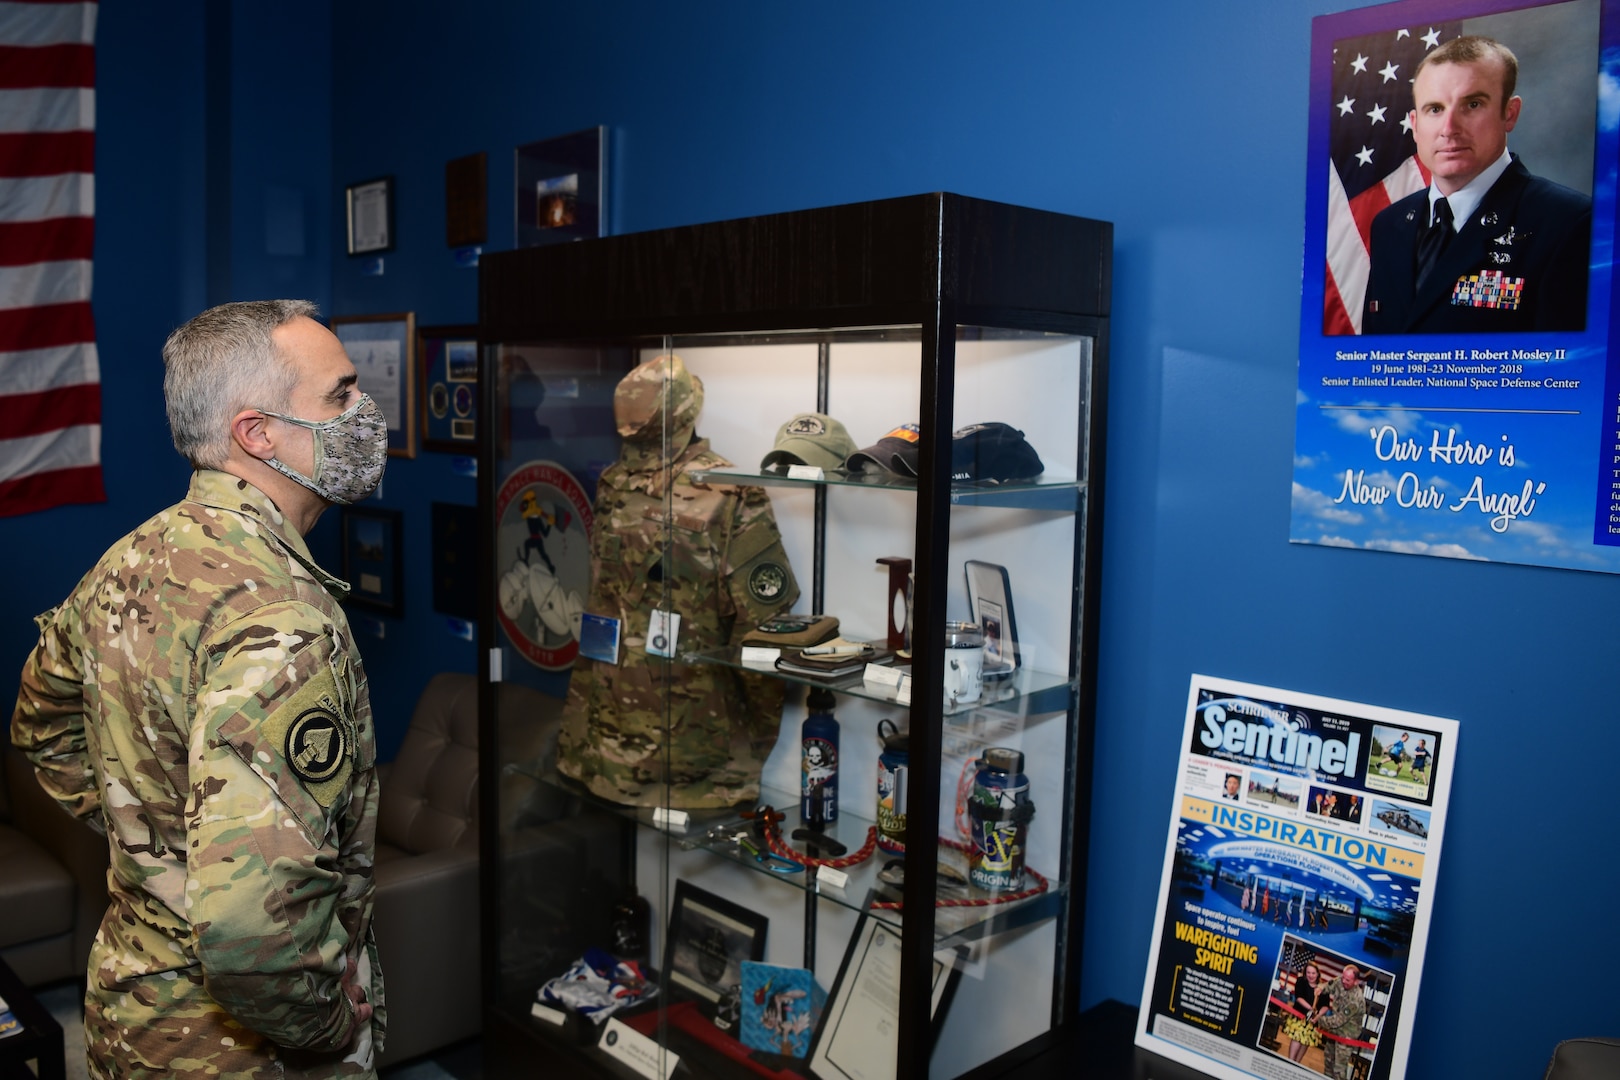 Senior Enlisted Advisor to the Chairman of the Joint Chiefs of Staff Ramón “CZ” Colón-López views the Senior Master Sgt. Harold Mosely, II library on the National Space Defense Center operations floor at Schriever Air Force Base, Colorado, Jan. 13, 2021.